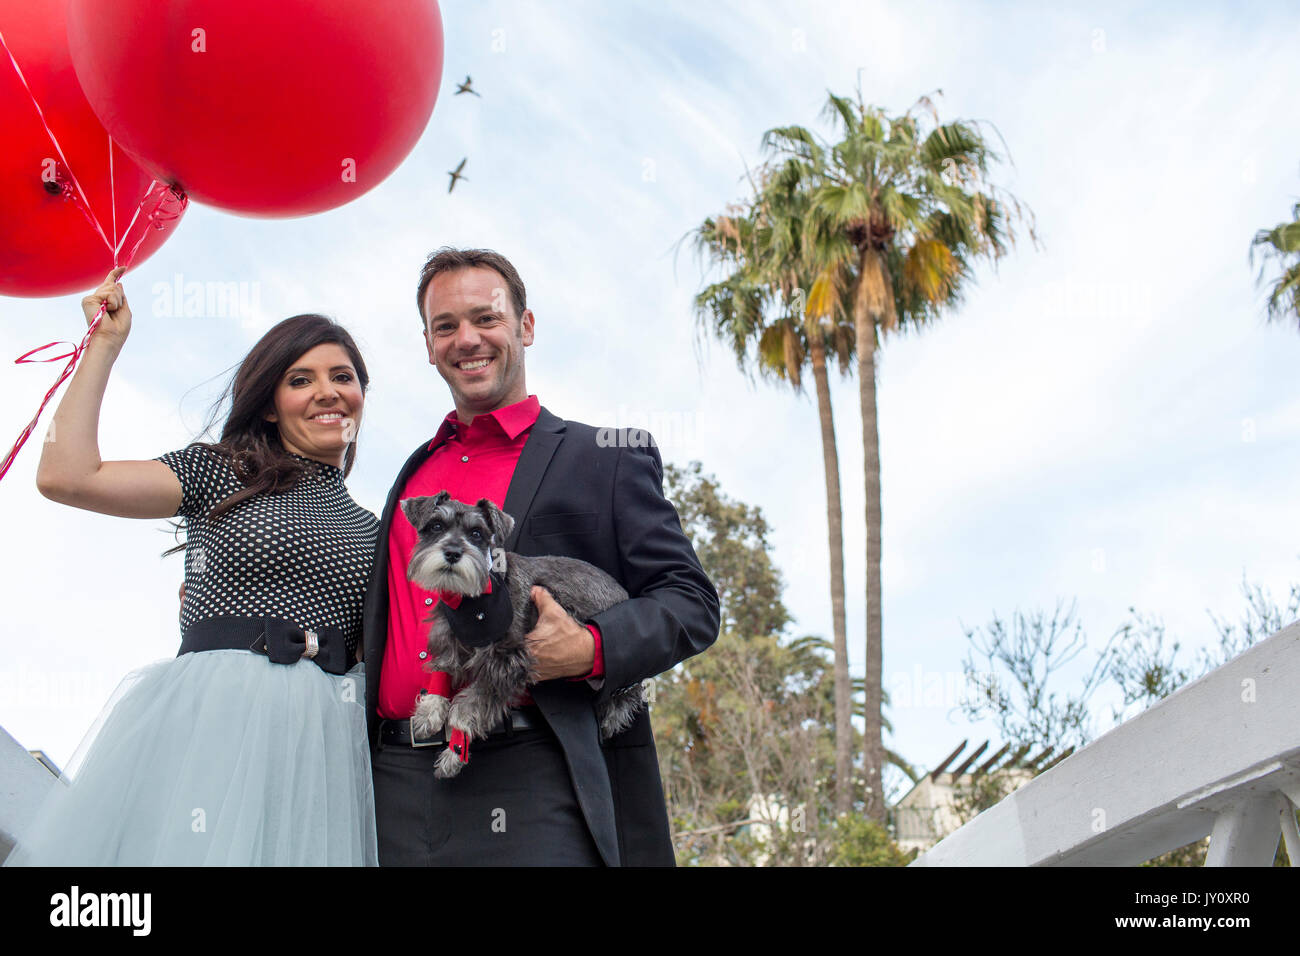 Smiling couple holding dog et red balloons Banque D'Images